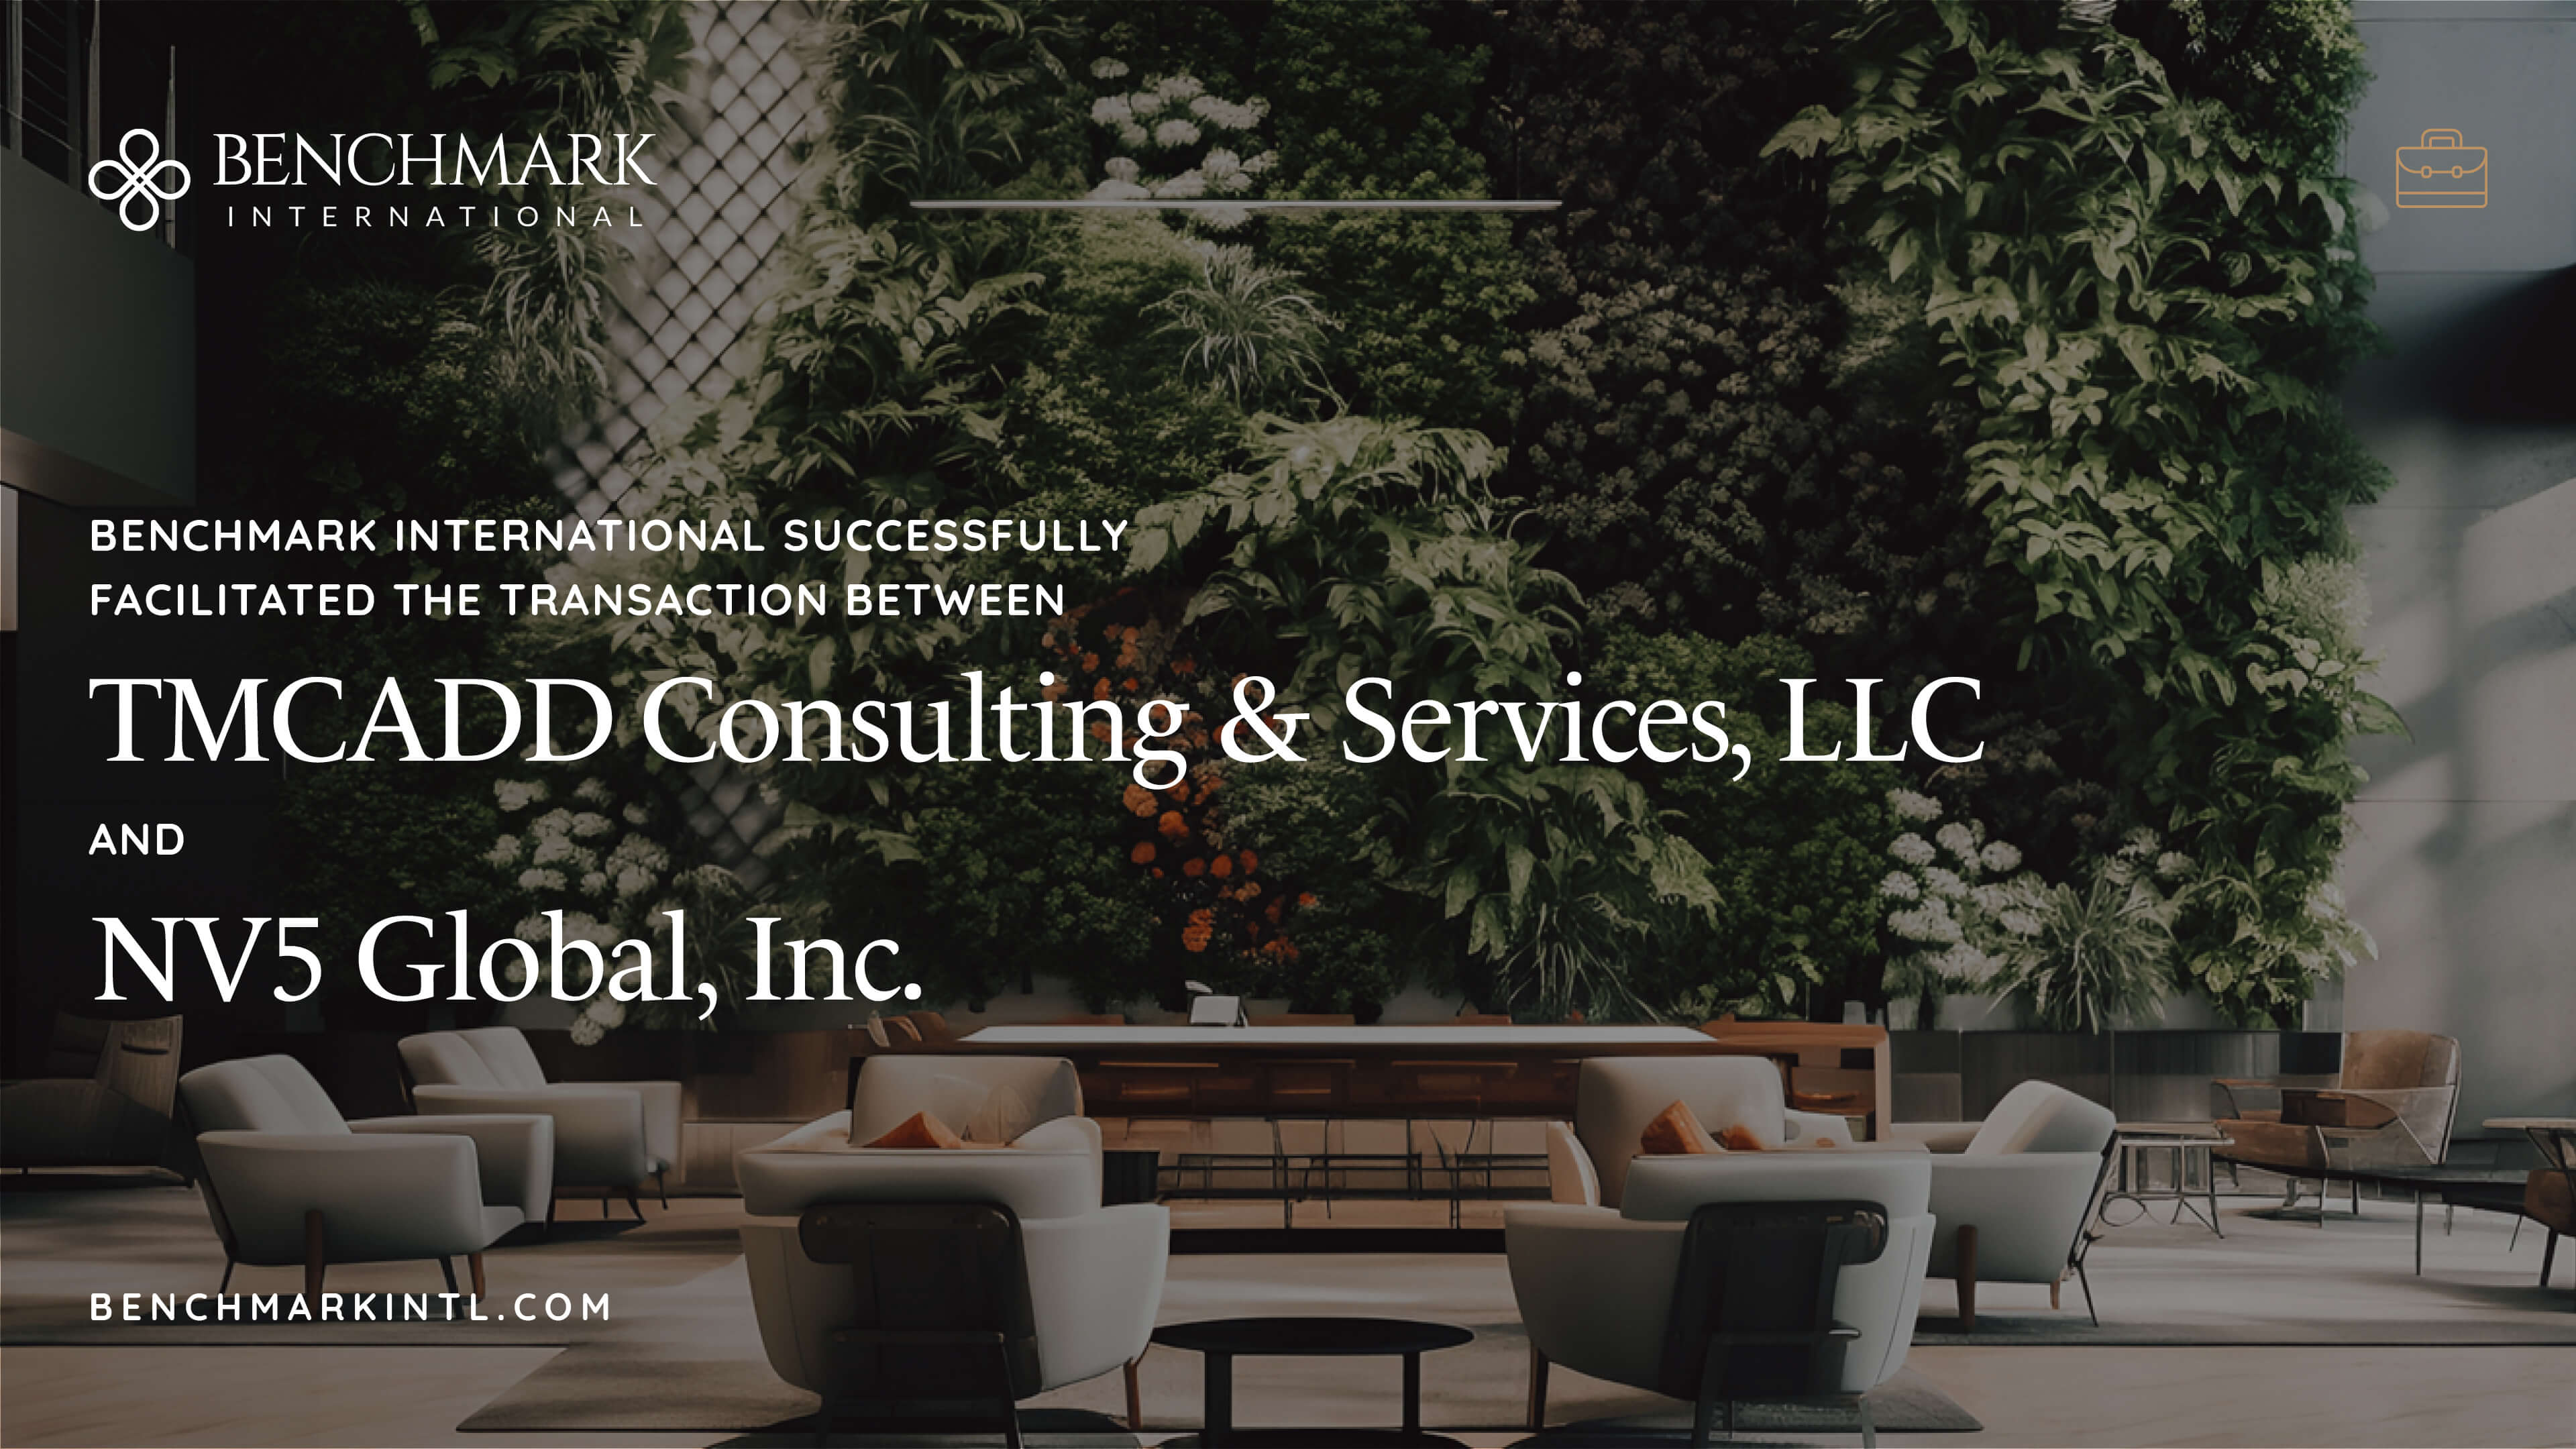 Benchmark International Successfully Facilitated the Transaction Between TMCADD Consulting & Services, LLC and NV5 Global, Inc.